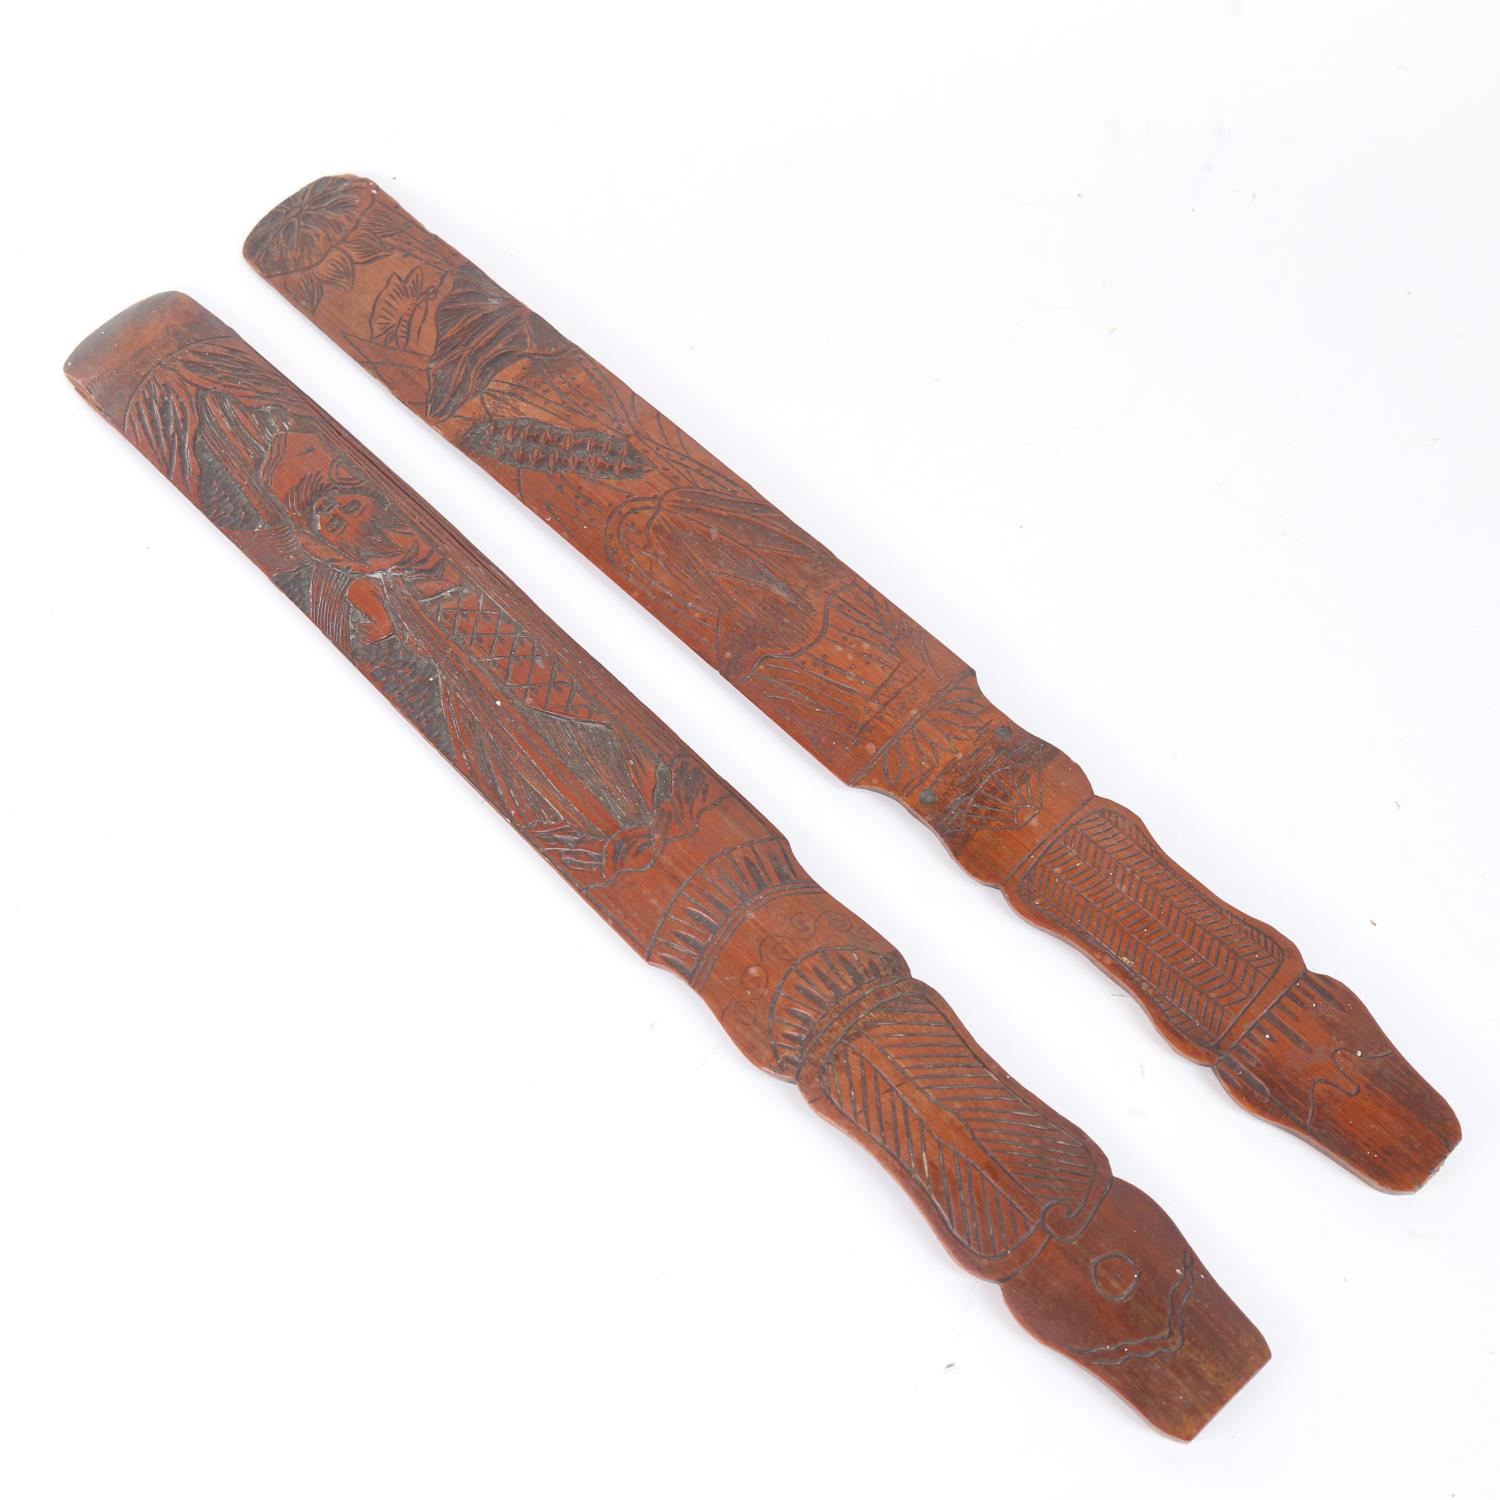 2 Chinese carved bamboo page turners, largest length 45cm